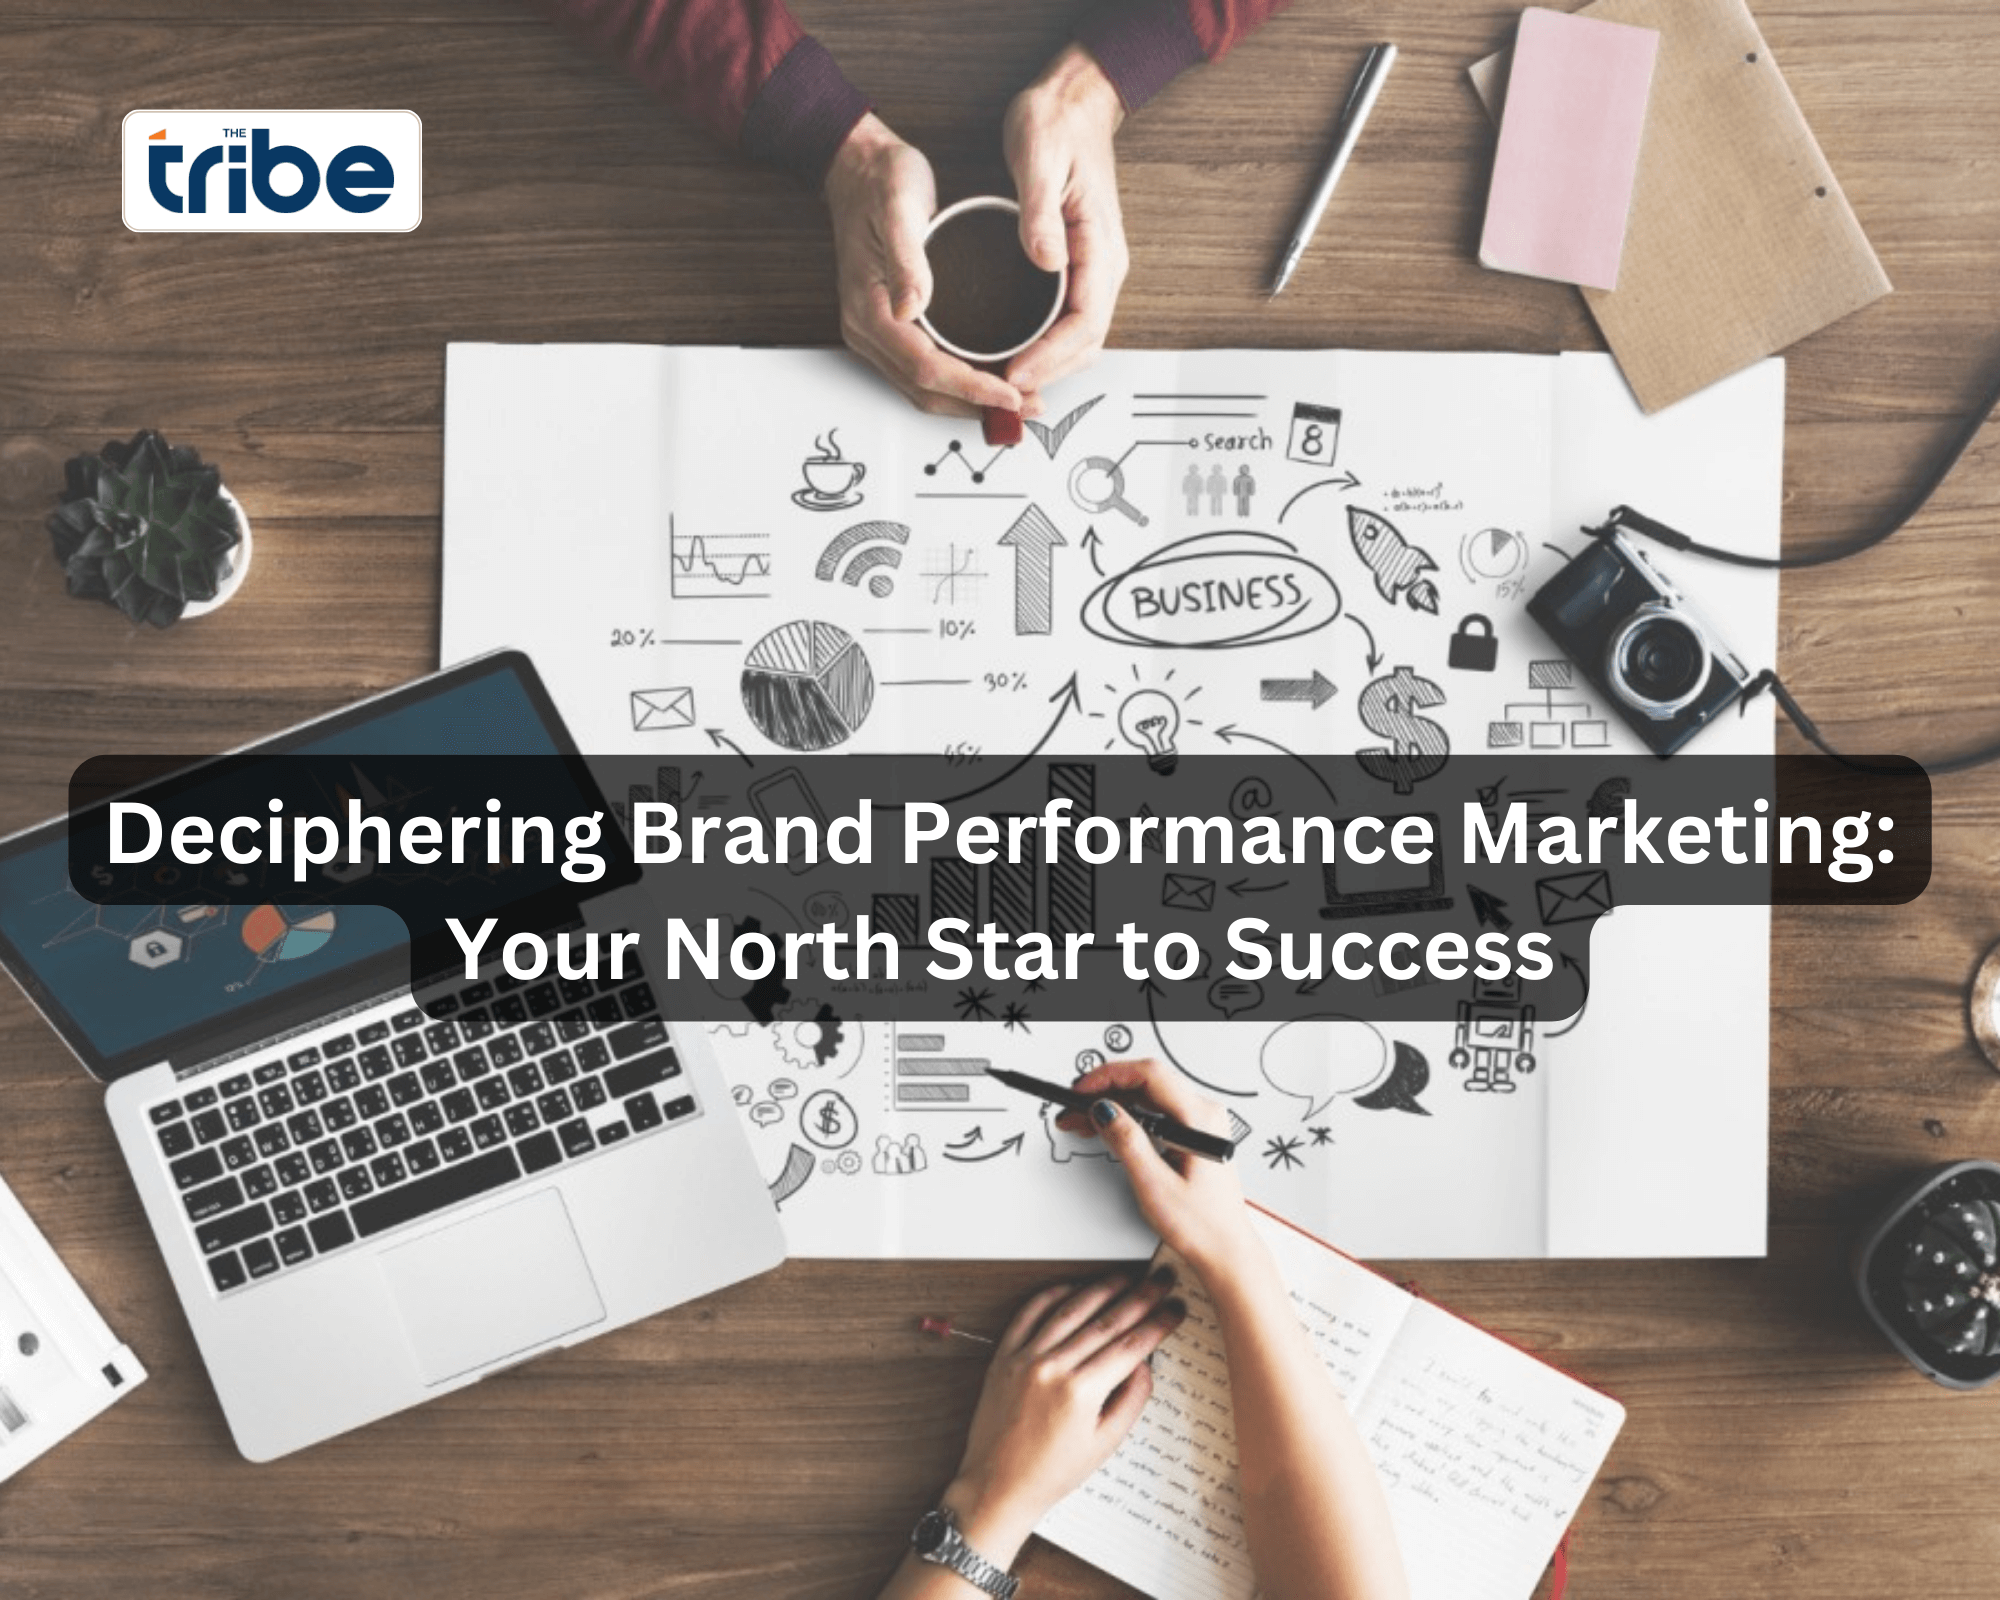 How to Create a Brand Performance Marketing Strategy That Works